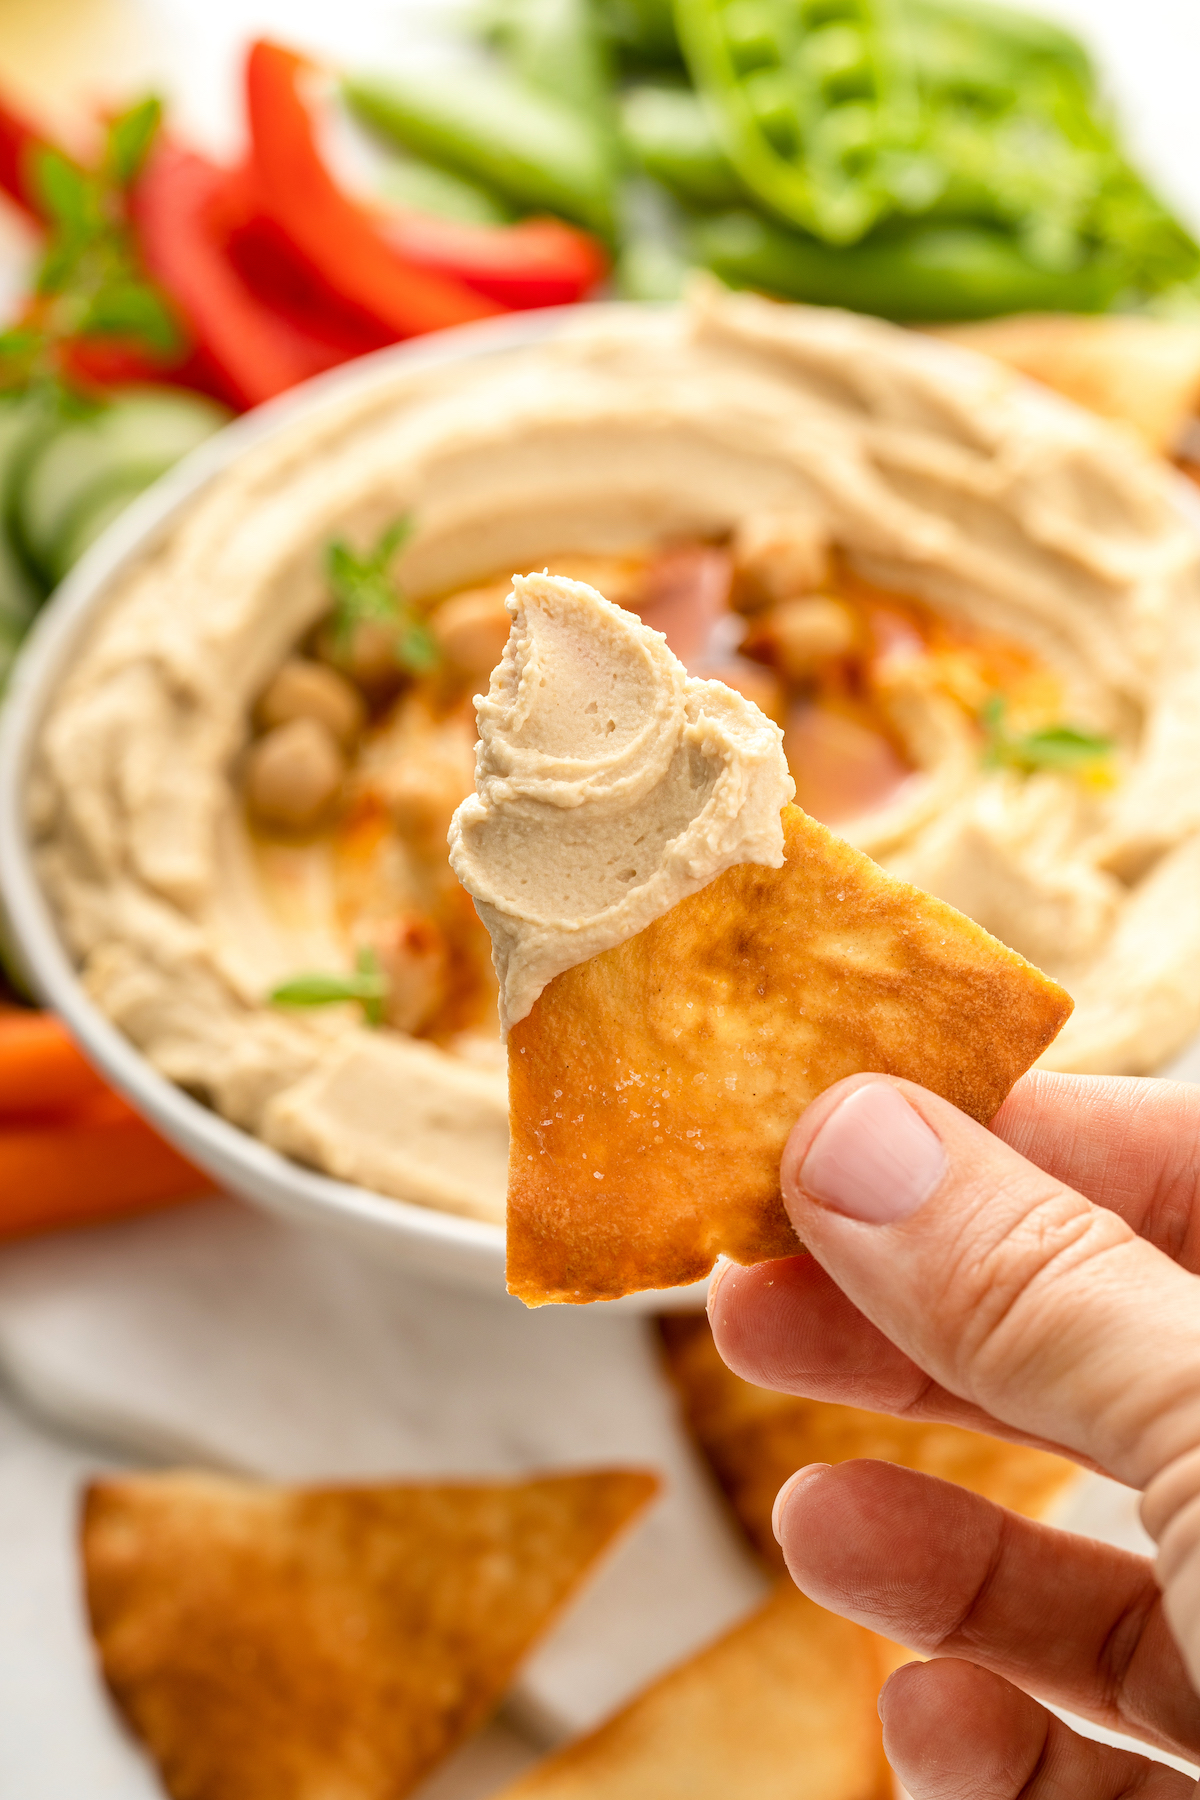 A pita chip dipped in chickpea dip and held toward the camera.